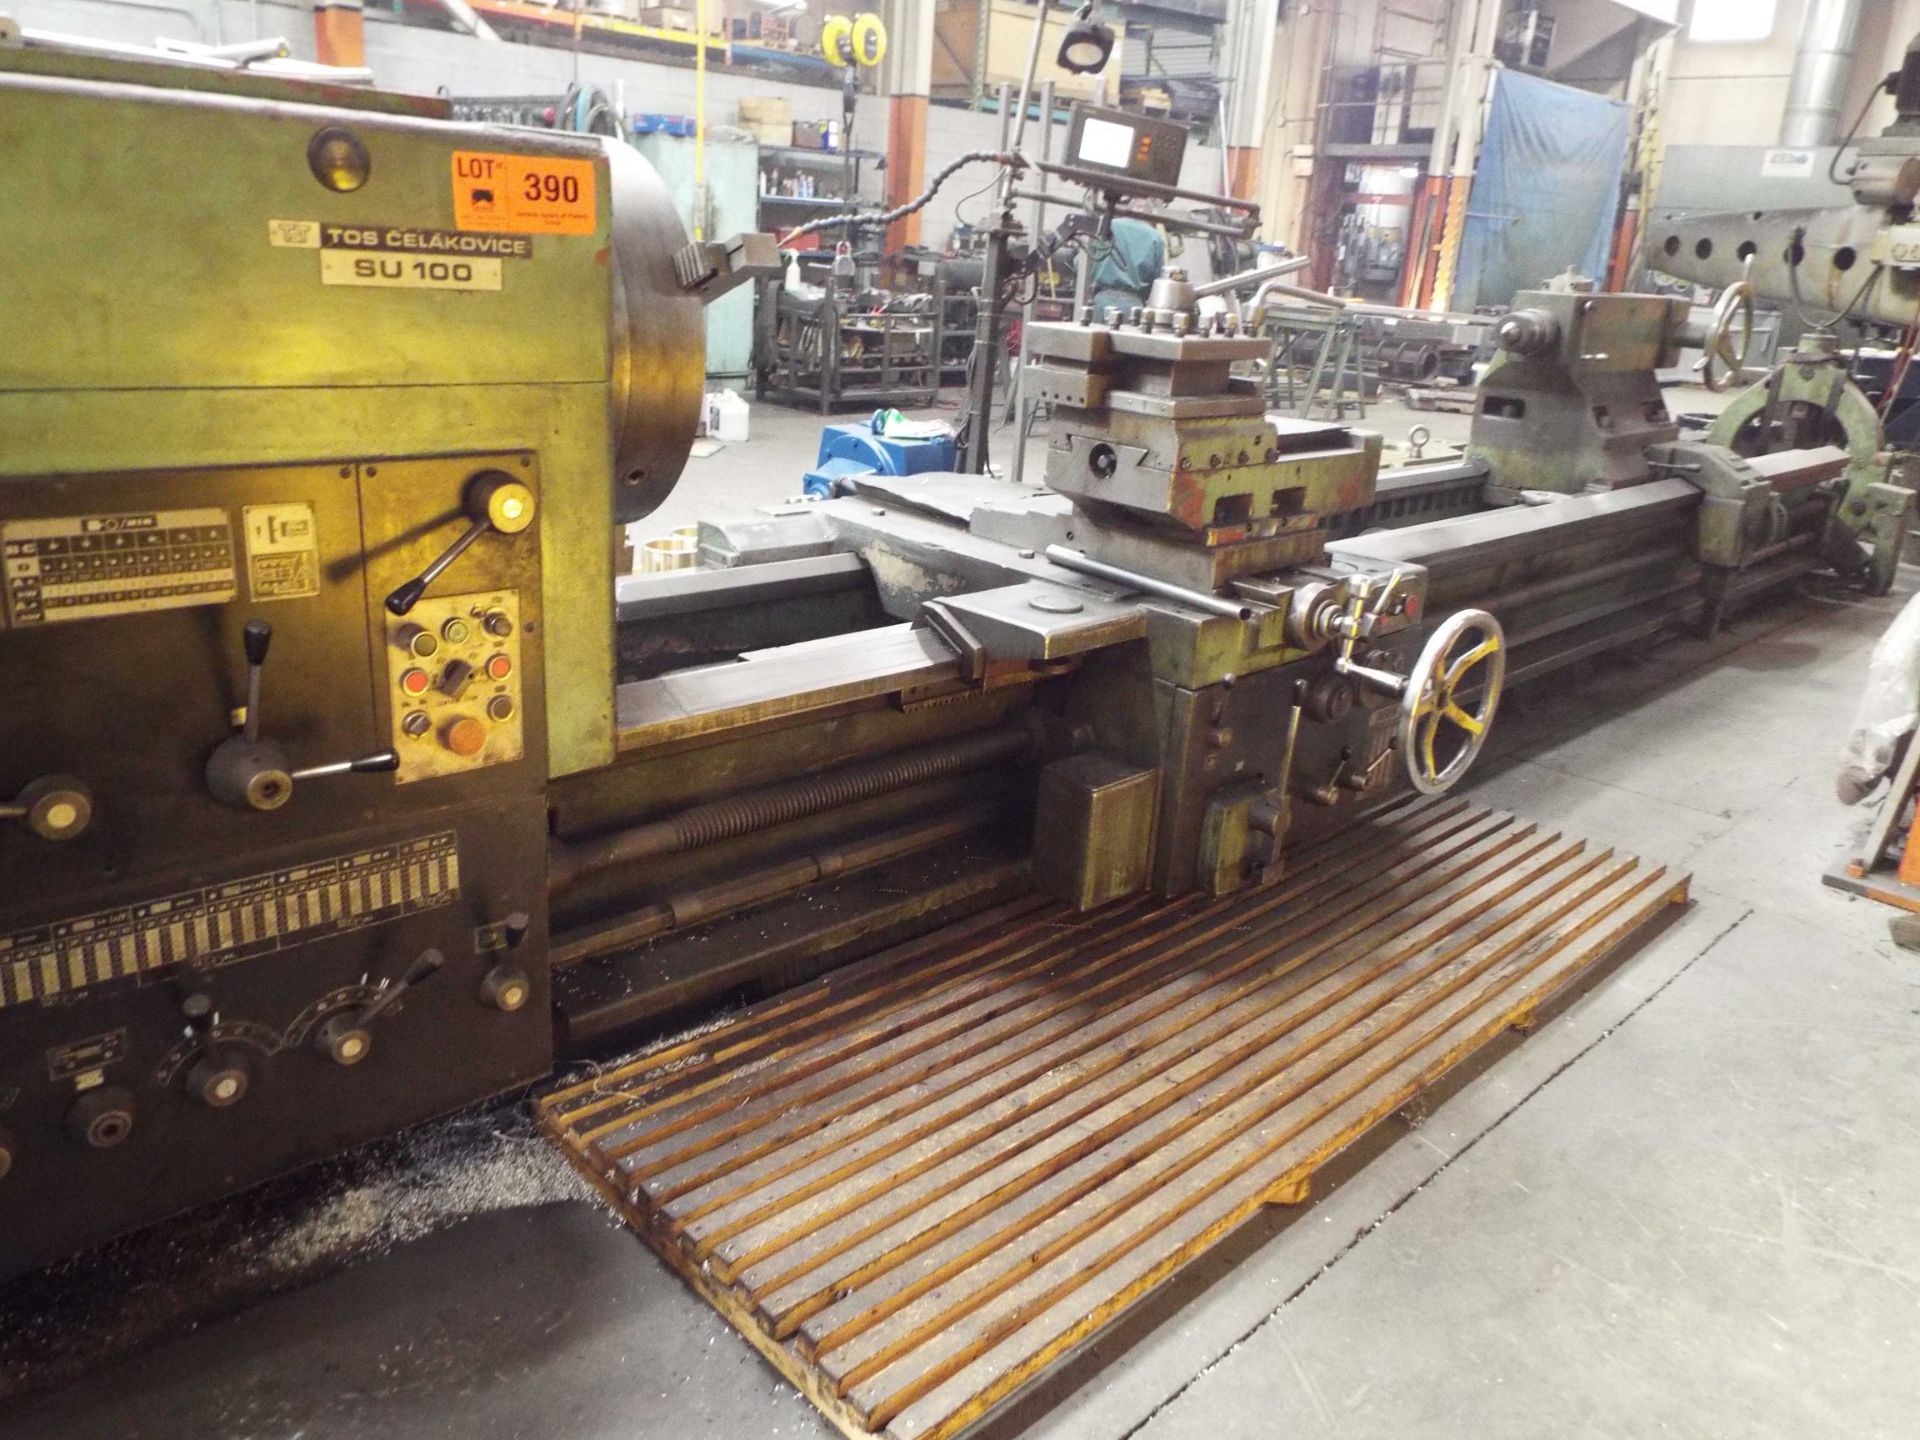 TOS CELAKOVICE SU100 LATHE WITH 48" SWING OVER BED, 204" DISTANCE BETWEEN CENTERS, 4" SPINDLE - Image 2 of 8